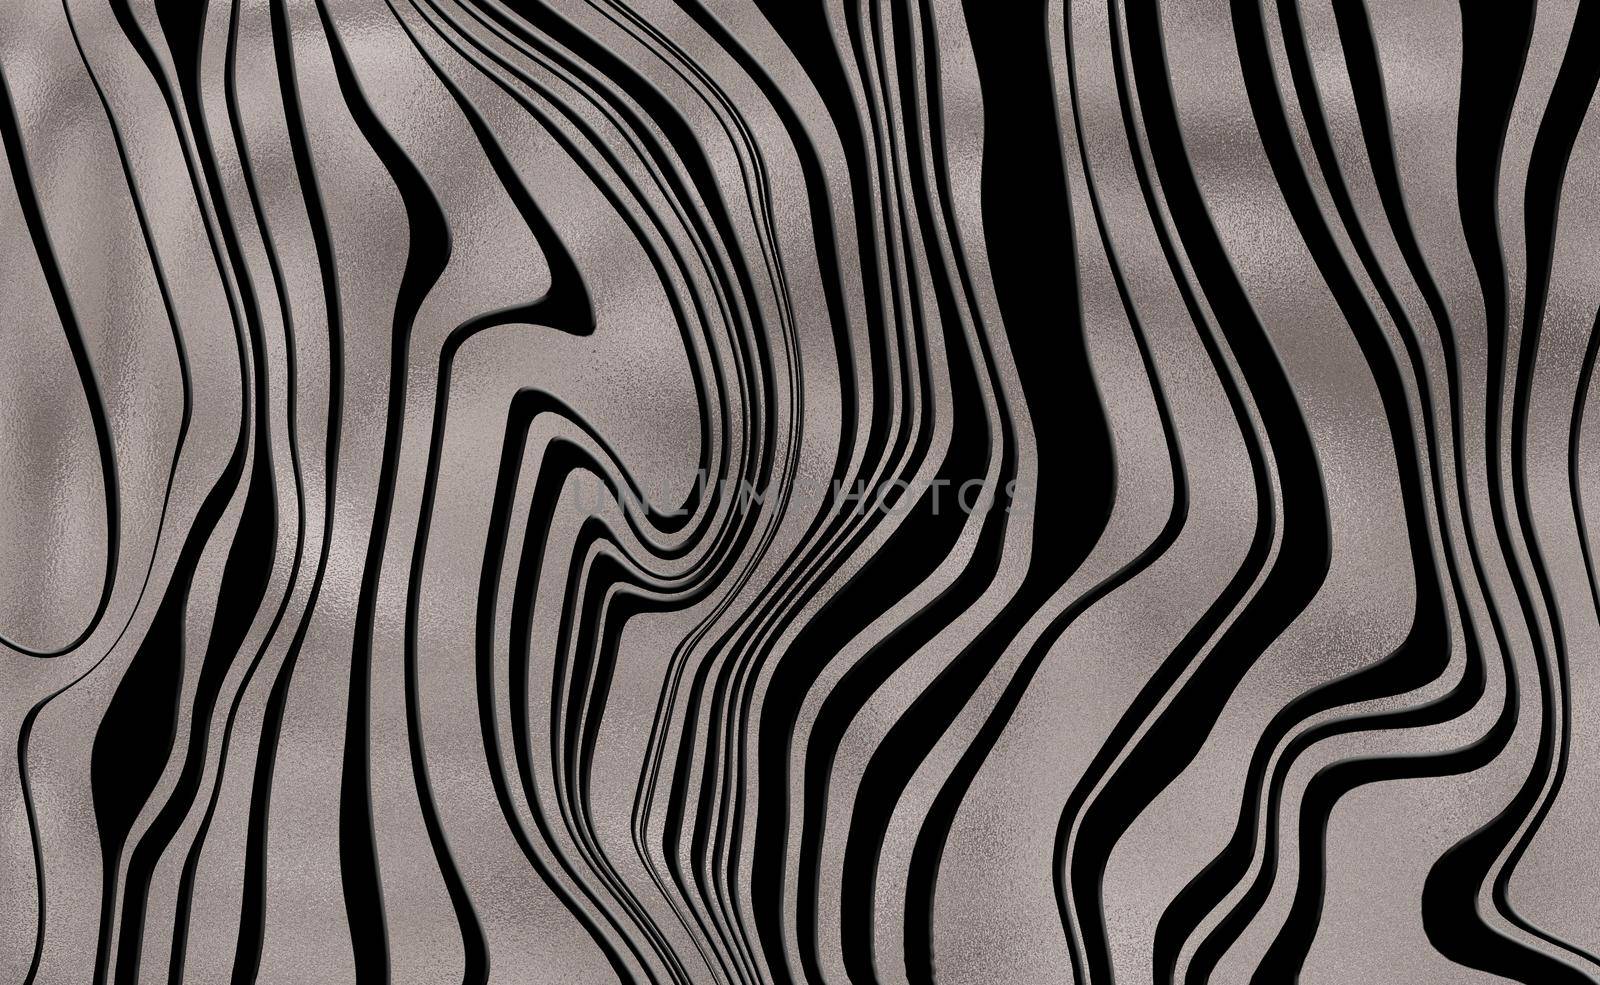 Zebra abstract stripes, wavy with colourful black gold beautiful pattern. Safari, wildlife zoo natural background. African animal design. Horizontal background. Illustration